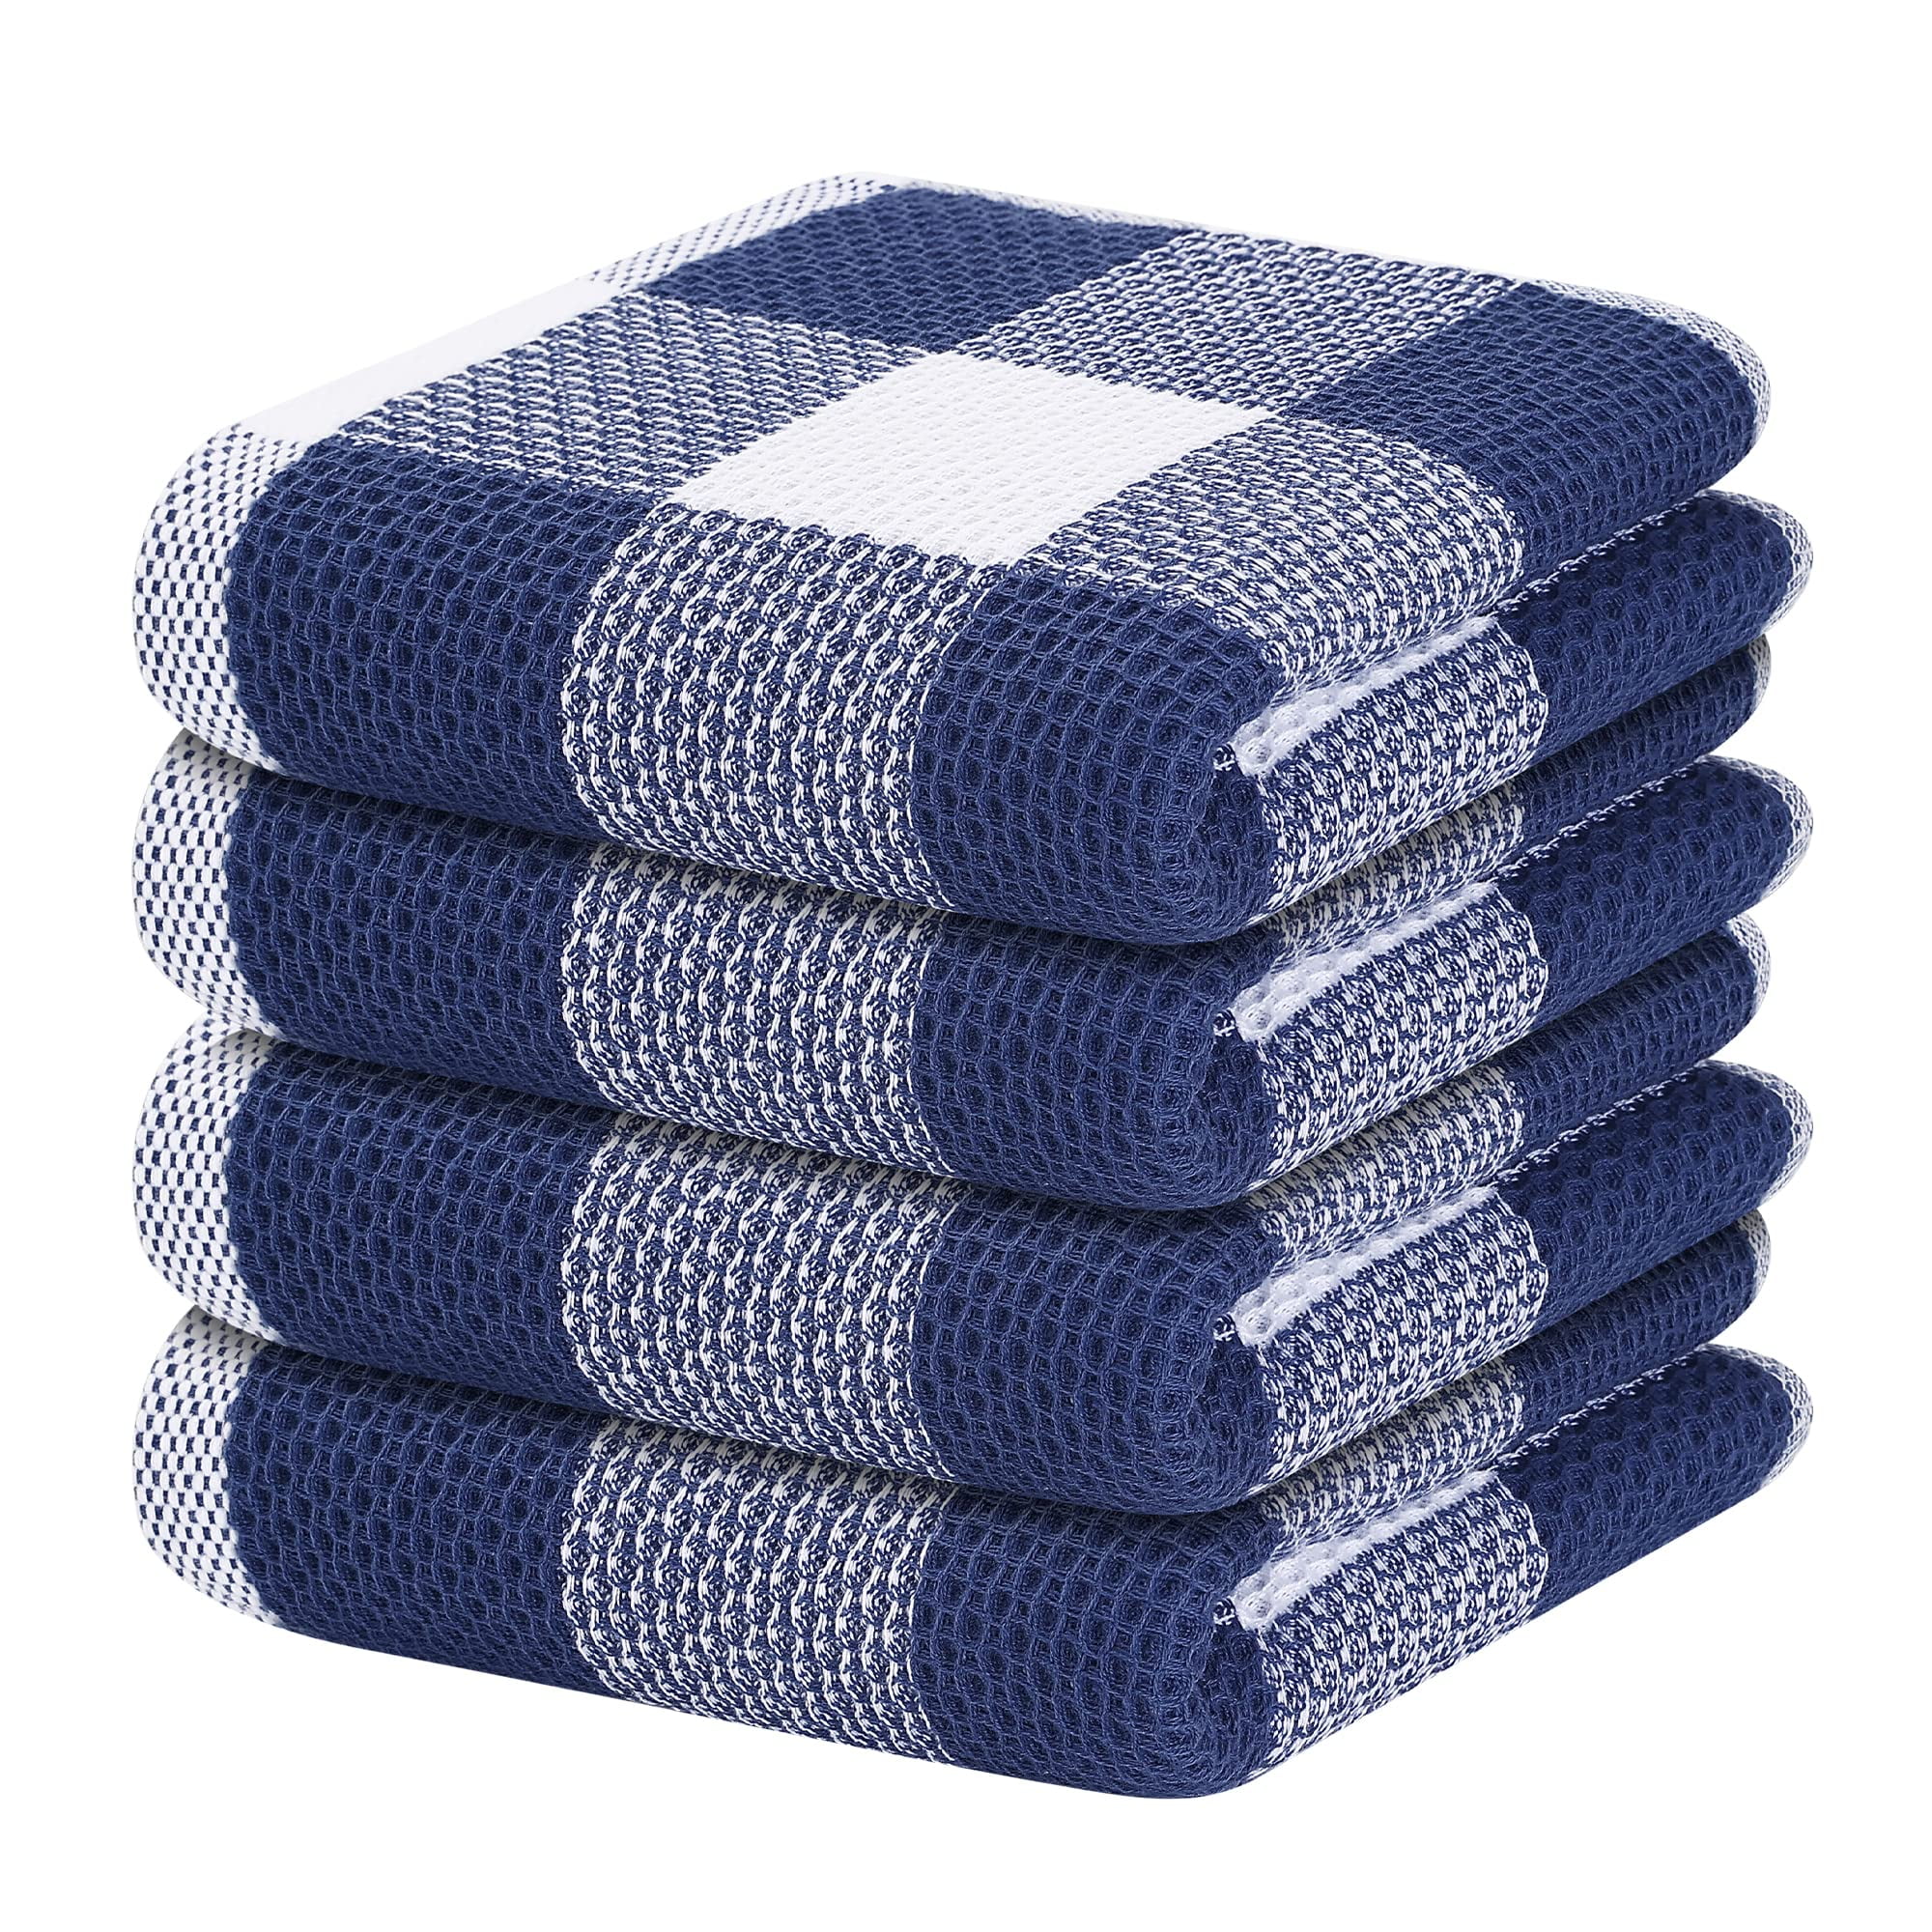 Homaxy 100% Cotton Terry Kitchen Towels(Navy Blue, 13 x 28 inches),  Checkered Designed, Soft and Super Absorbent Dish Towels, 4 Pack